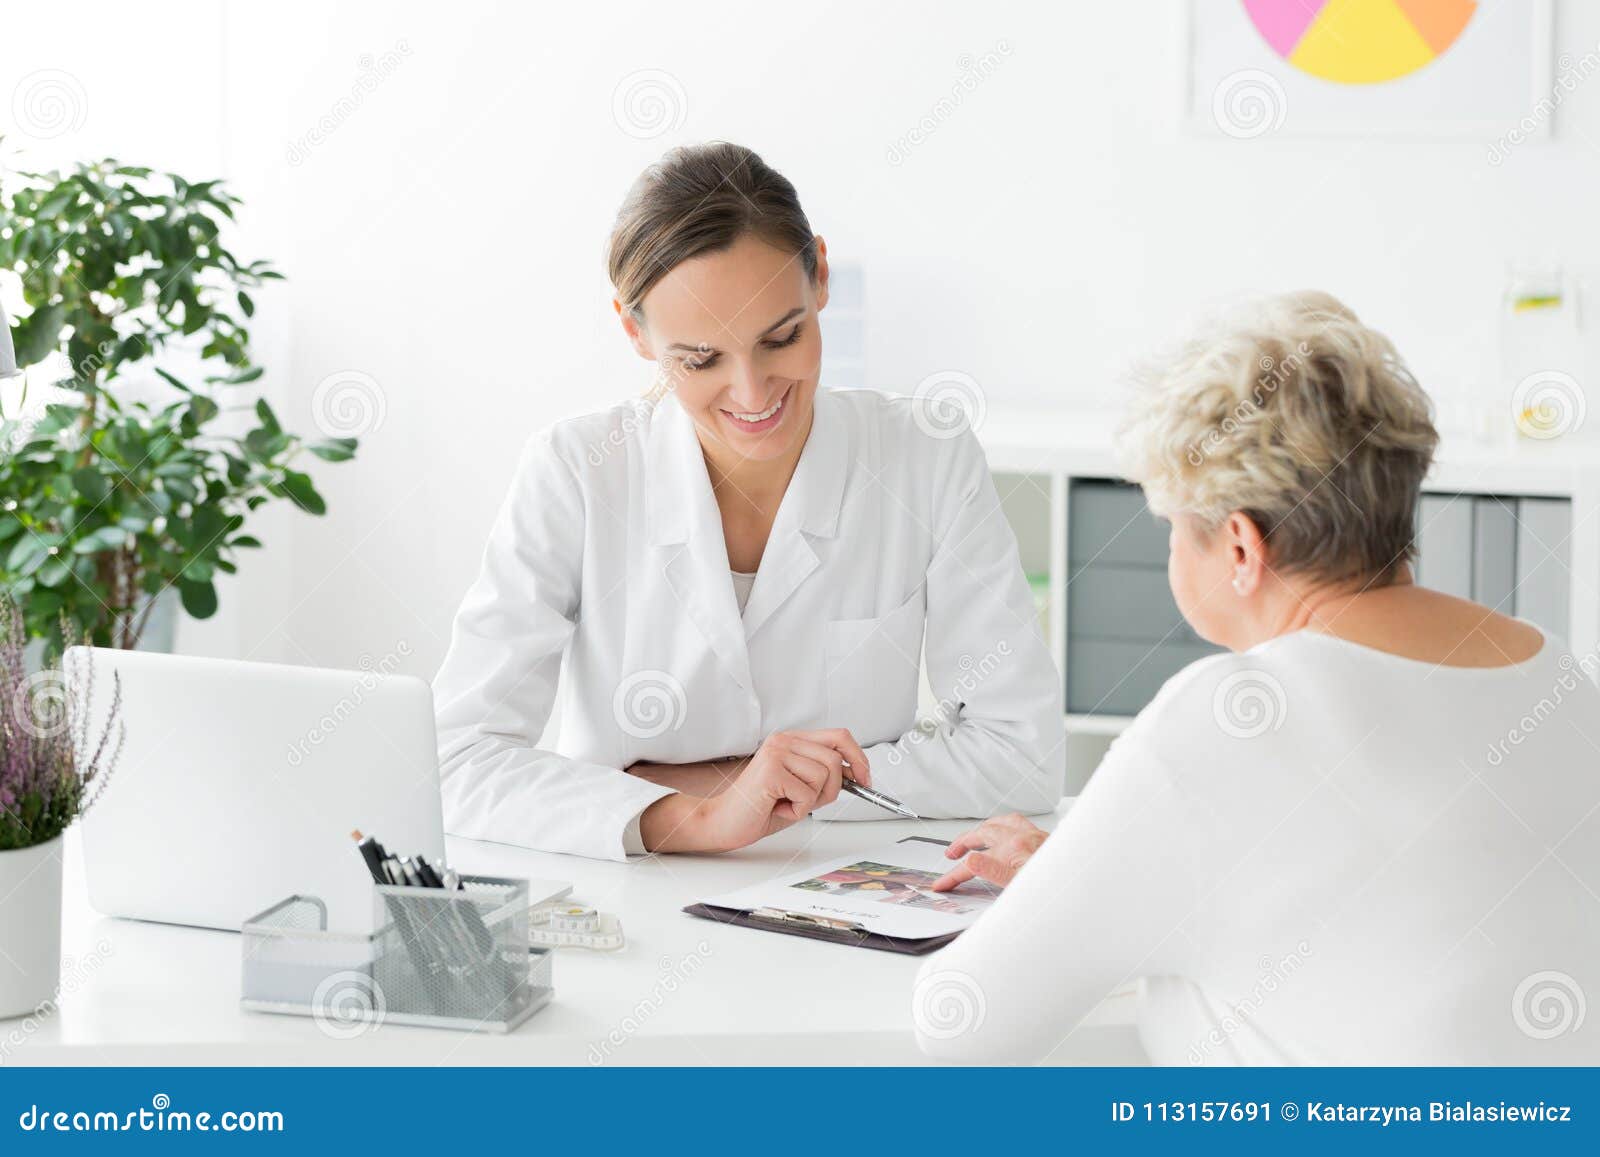 dietician and patient during meeting